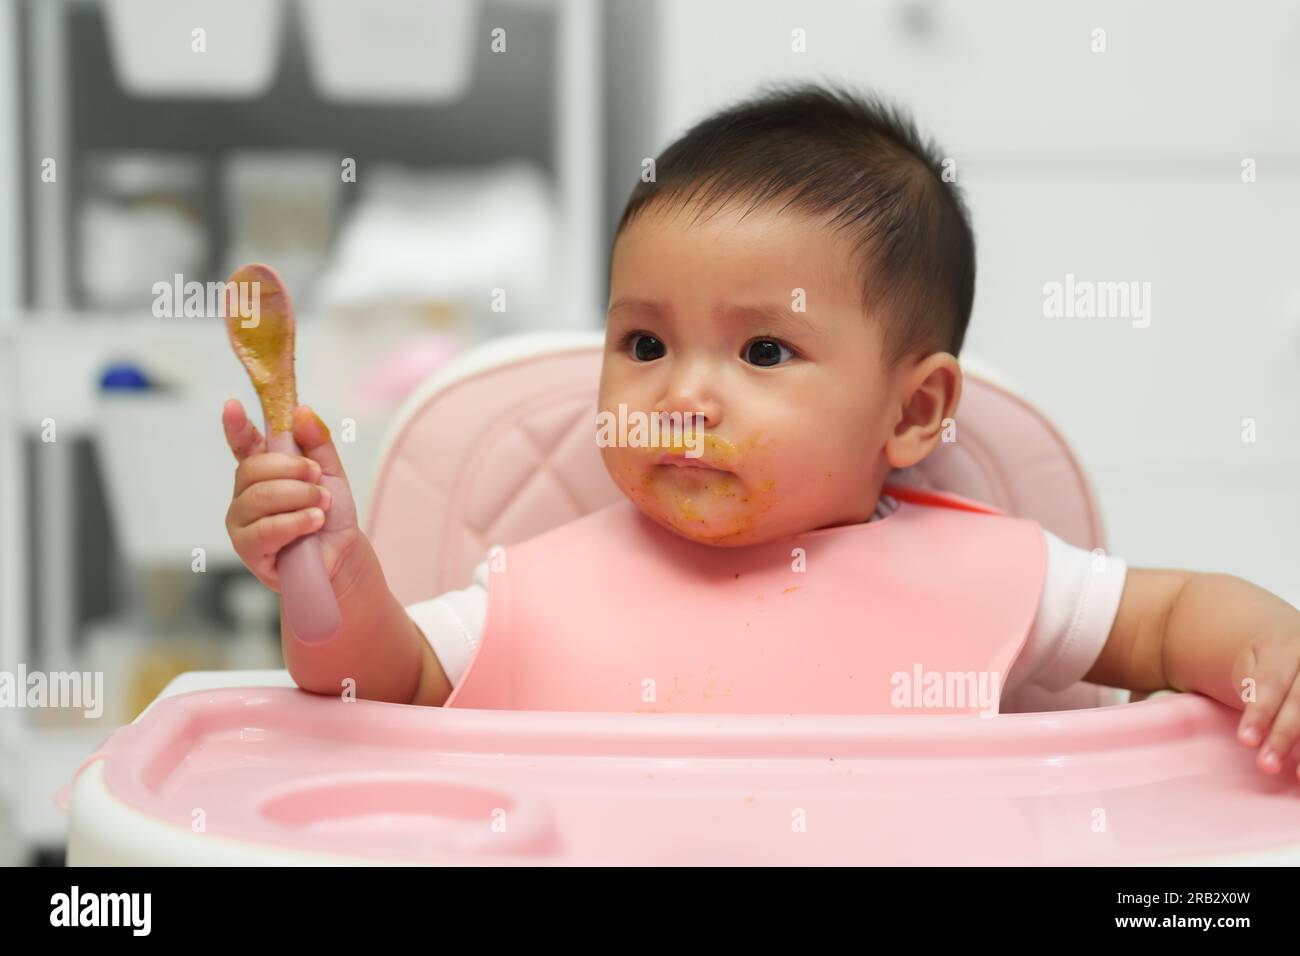 happy infant baby eating food itself with a spoon at home Stock Photo